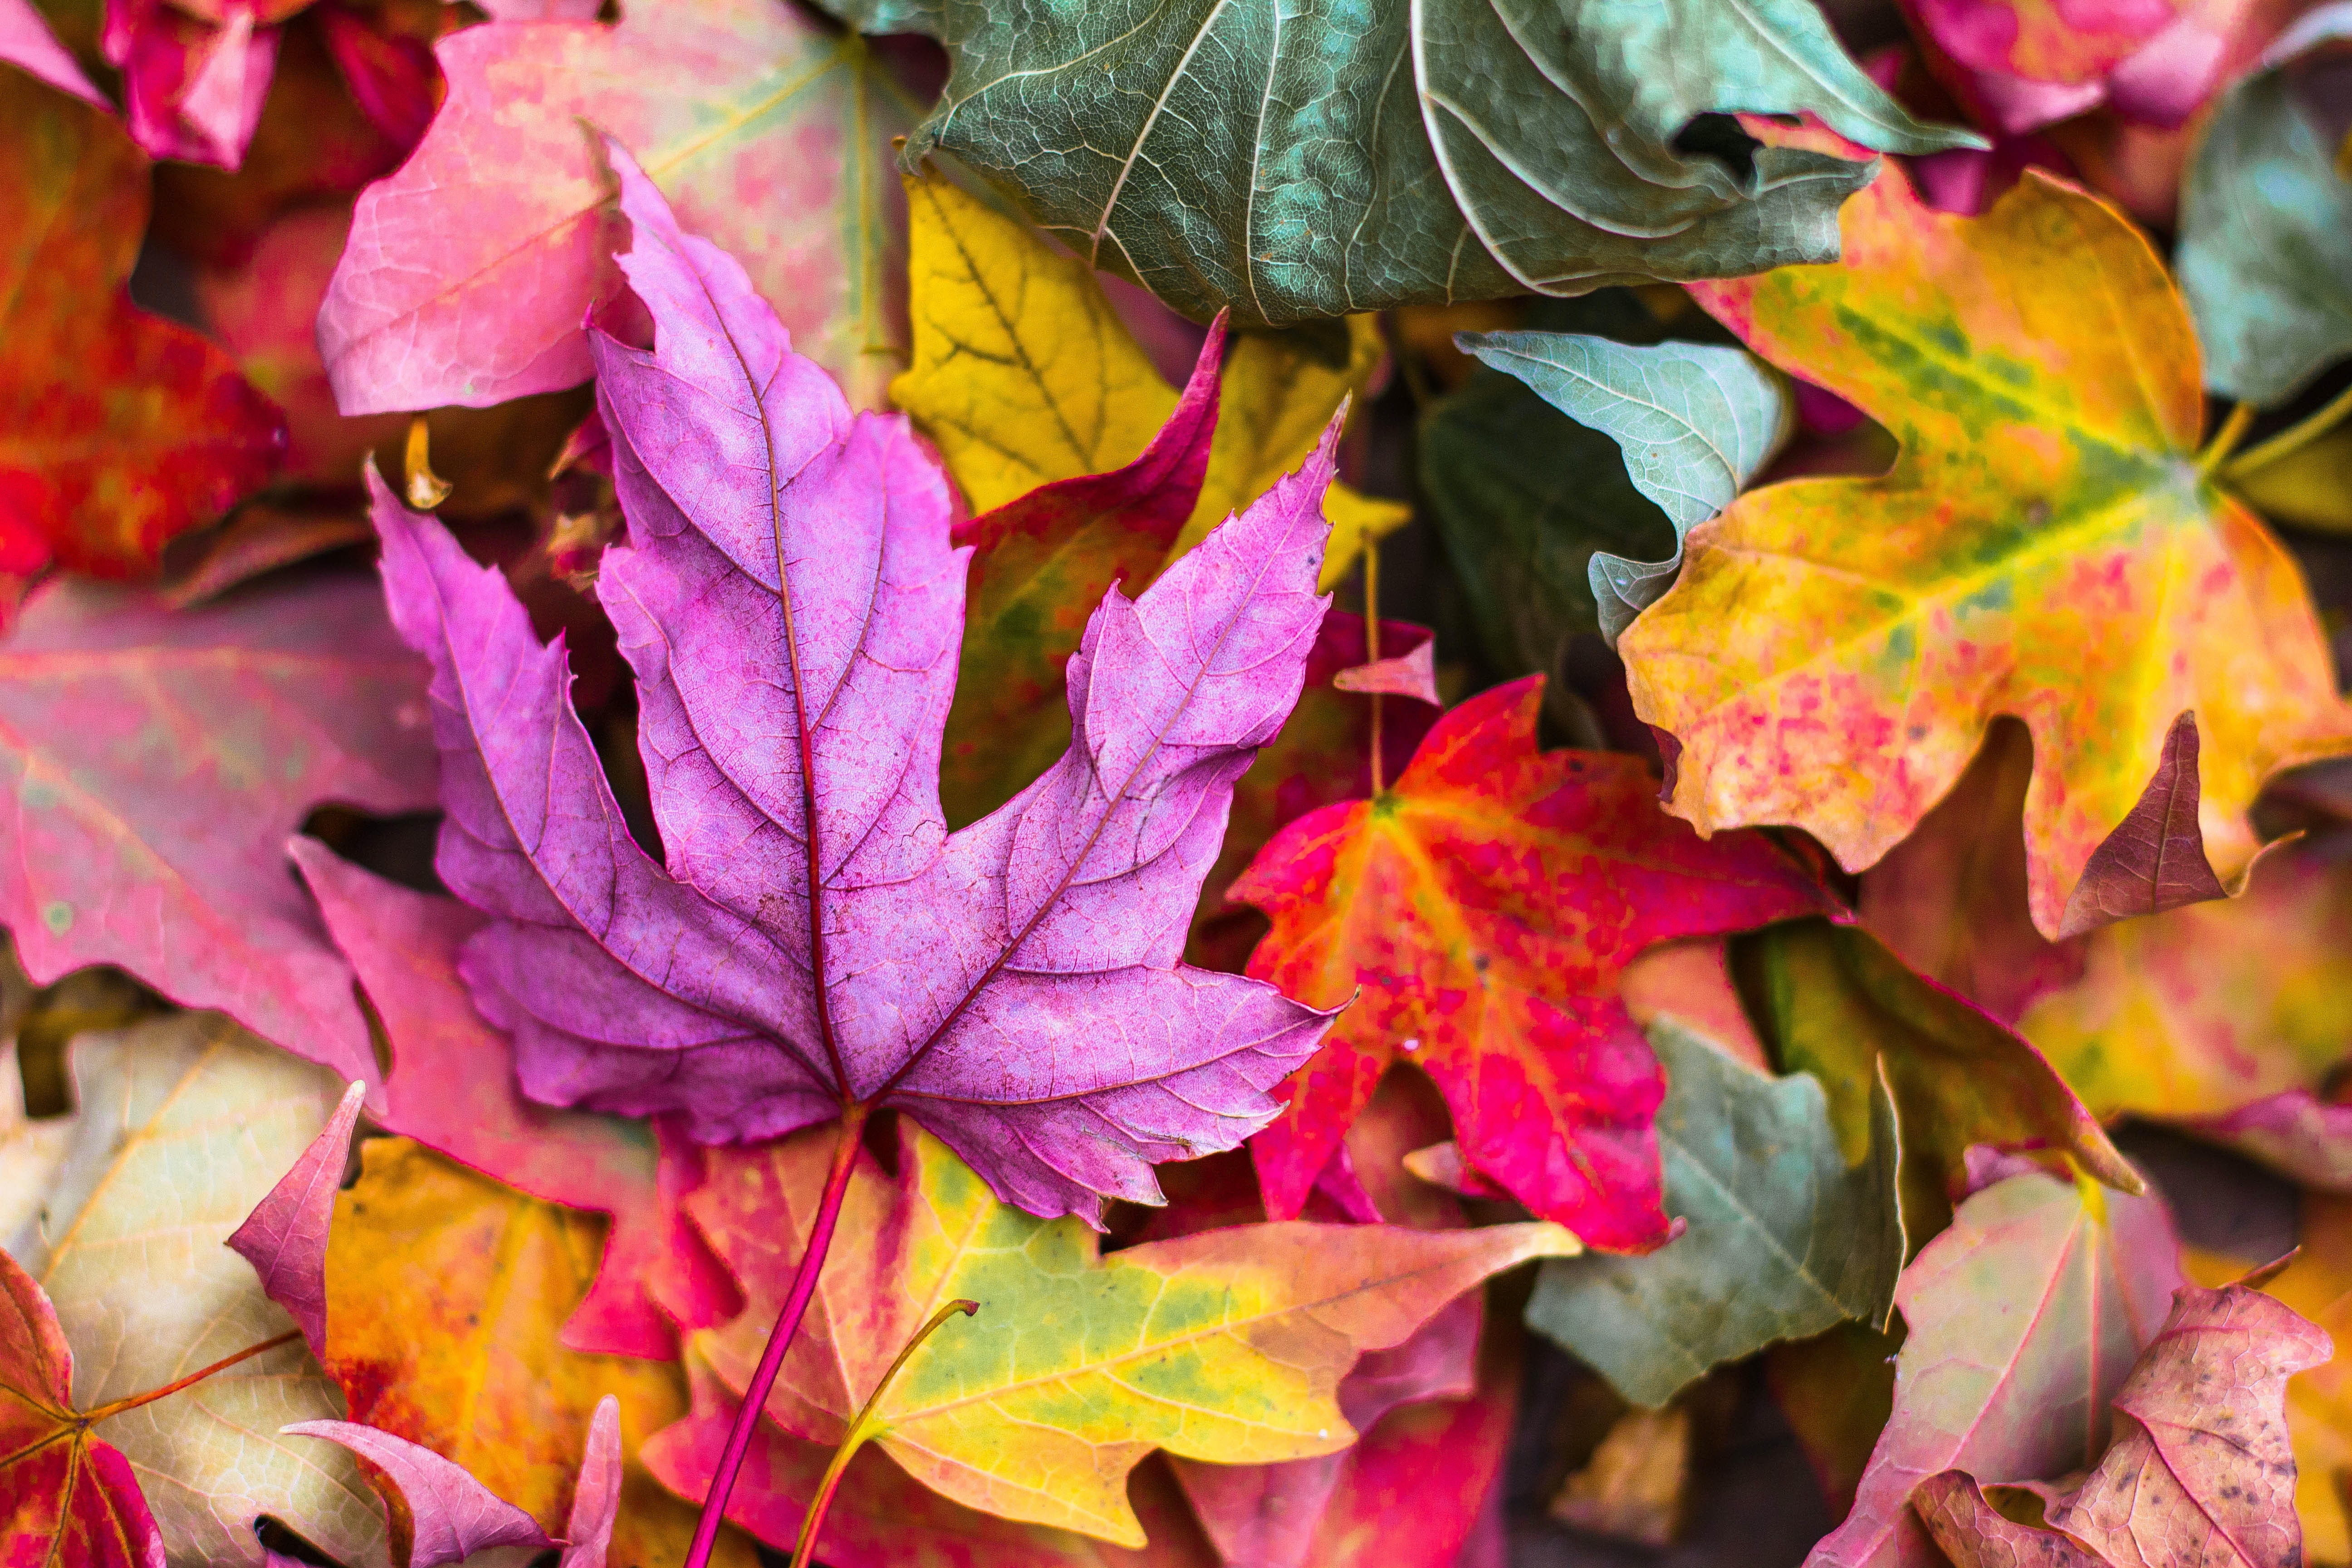   Image of fall leaves by Jeremy Thomas 